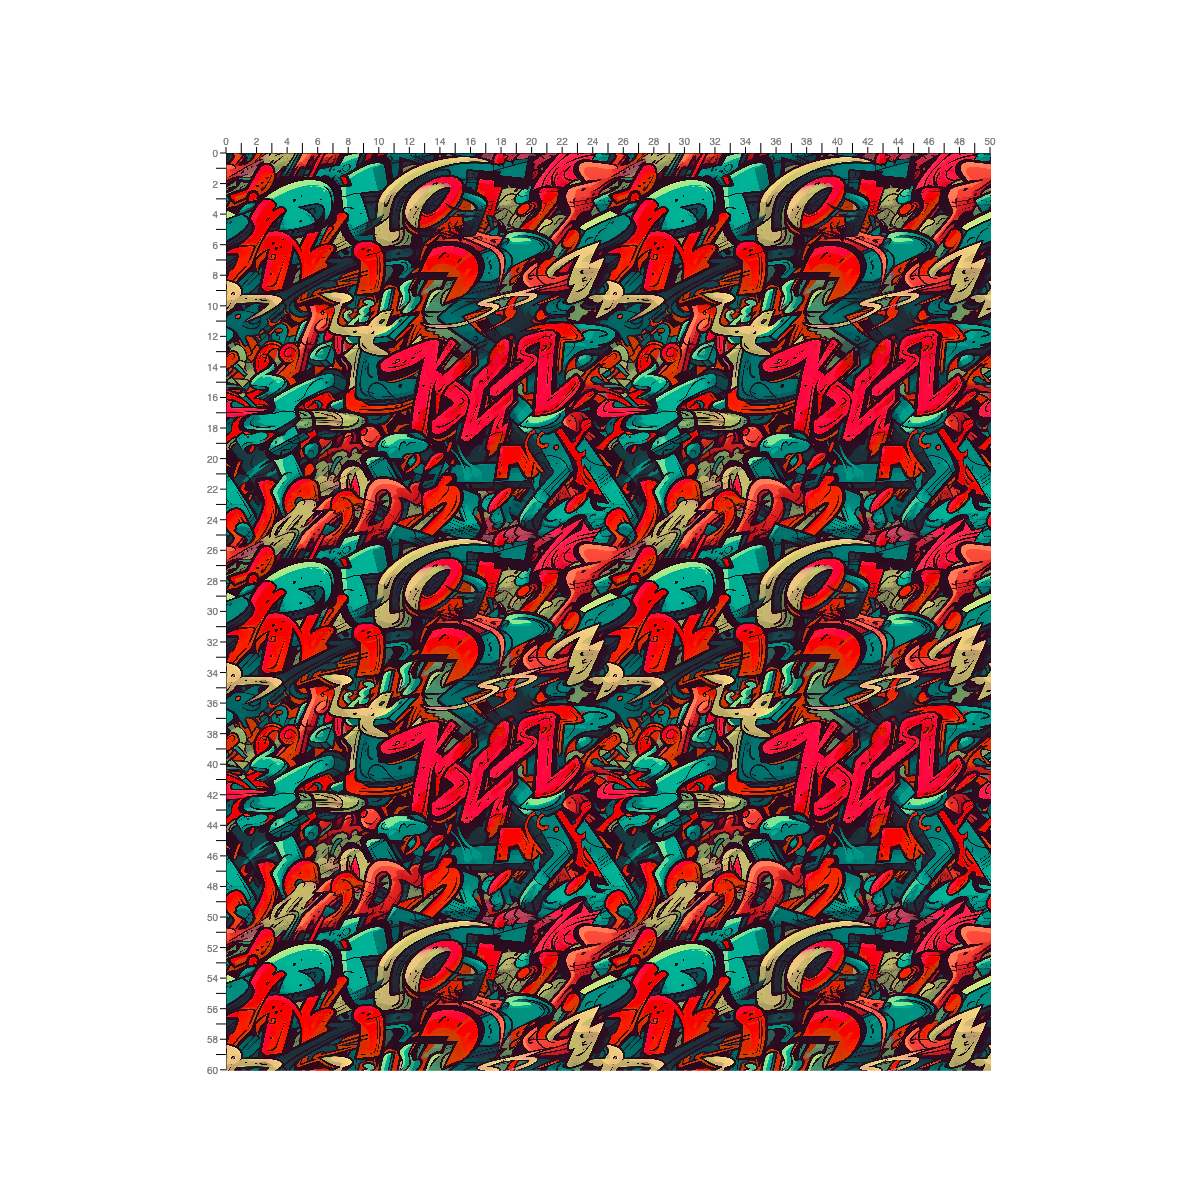 Graffiti Wildstyle Chicago Tapestry (Small) by Studio Ten Design